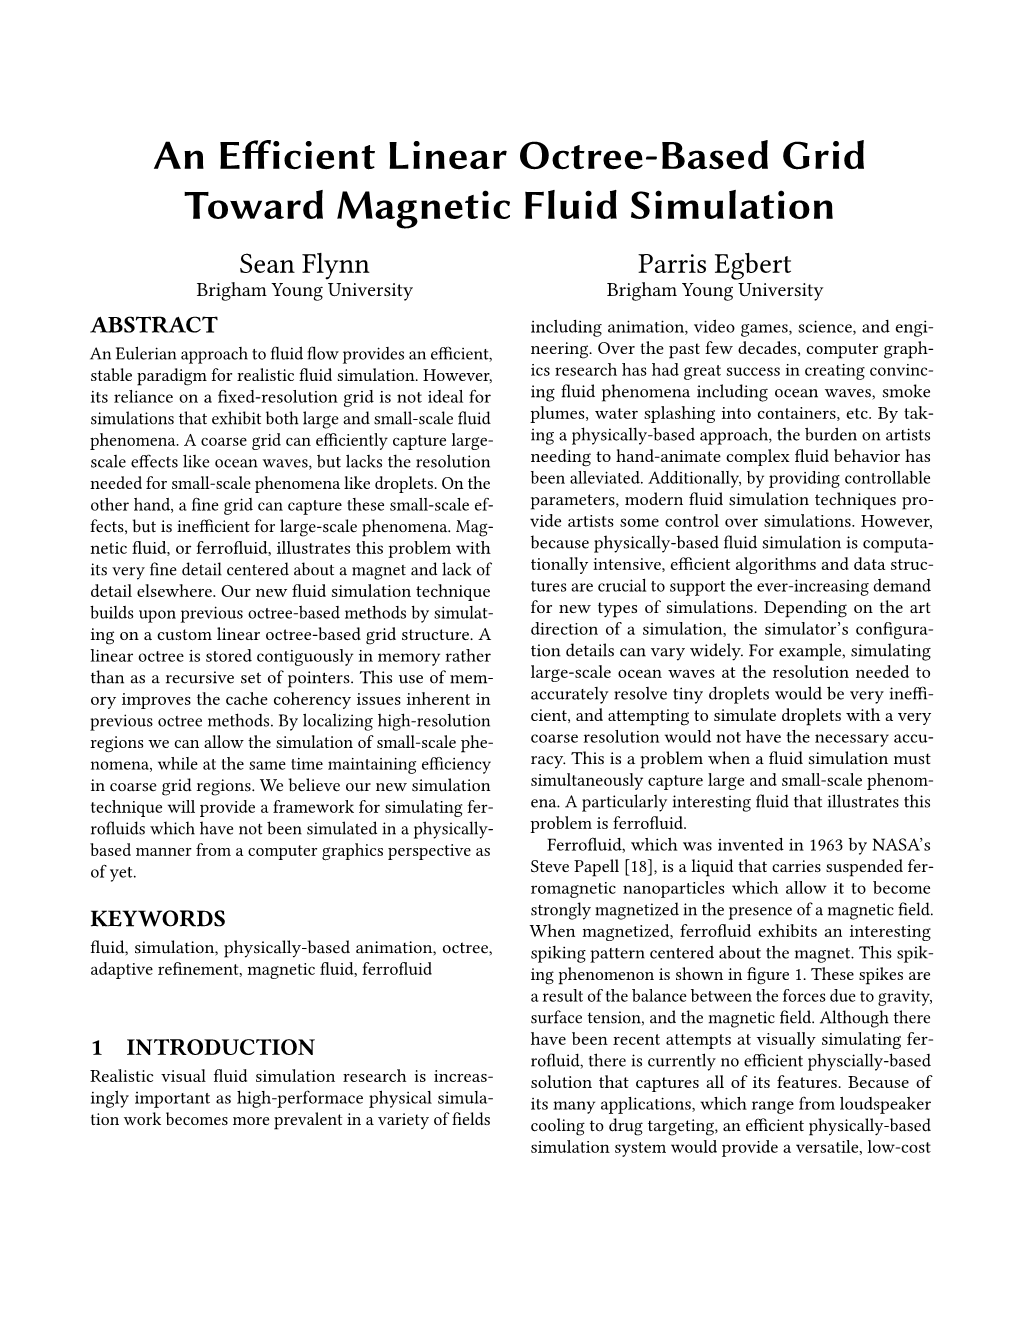 An Efficient Linear Octree-Based Grid Toward Magnetic Fluid Stimulation